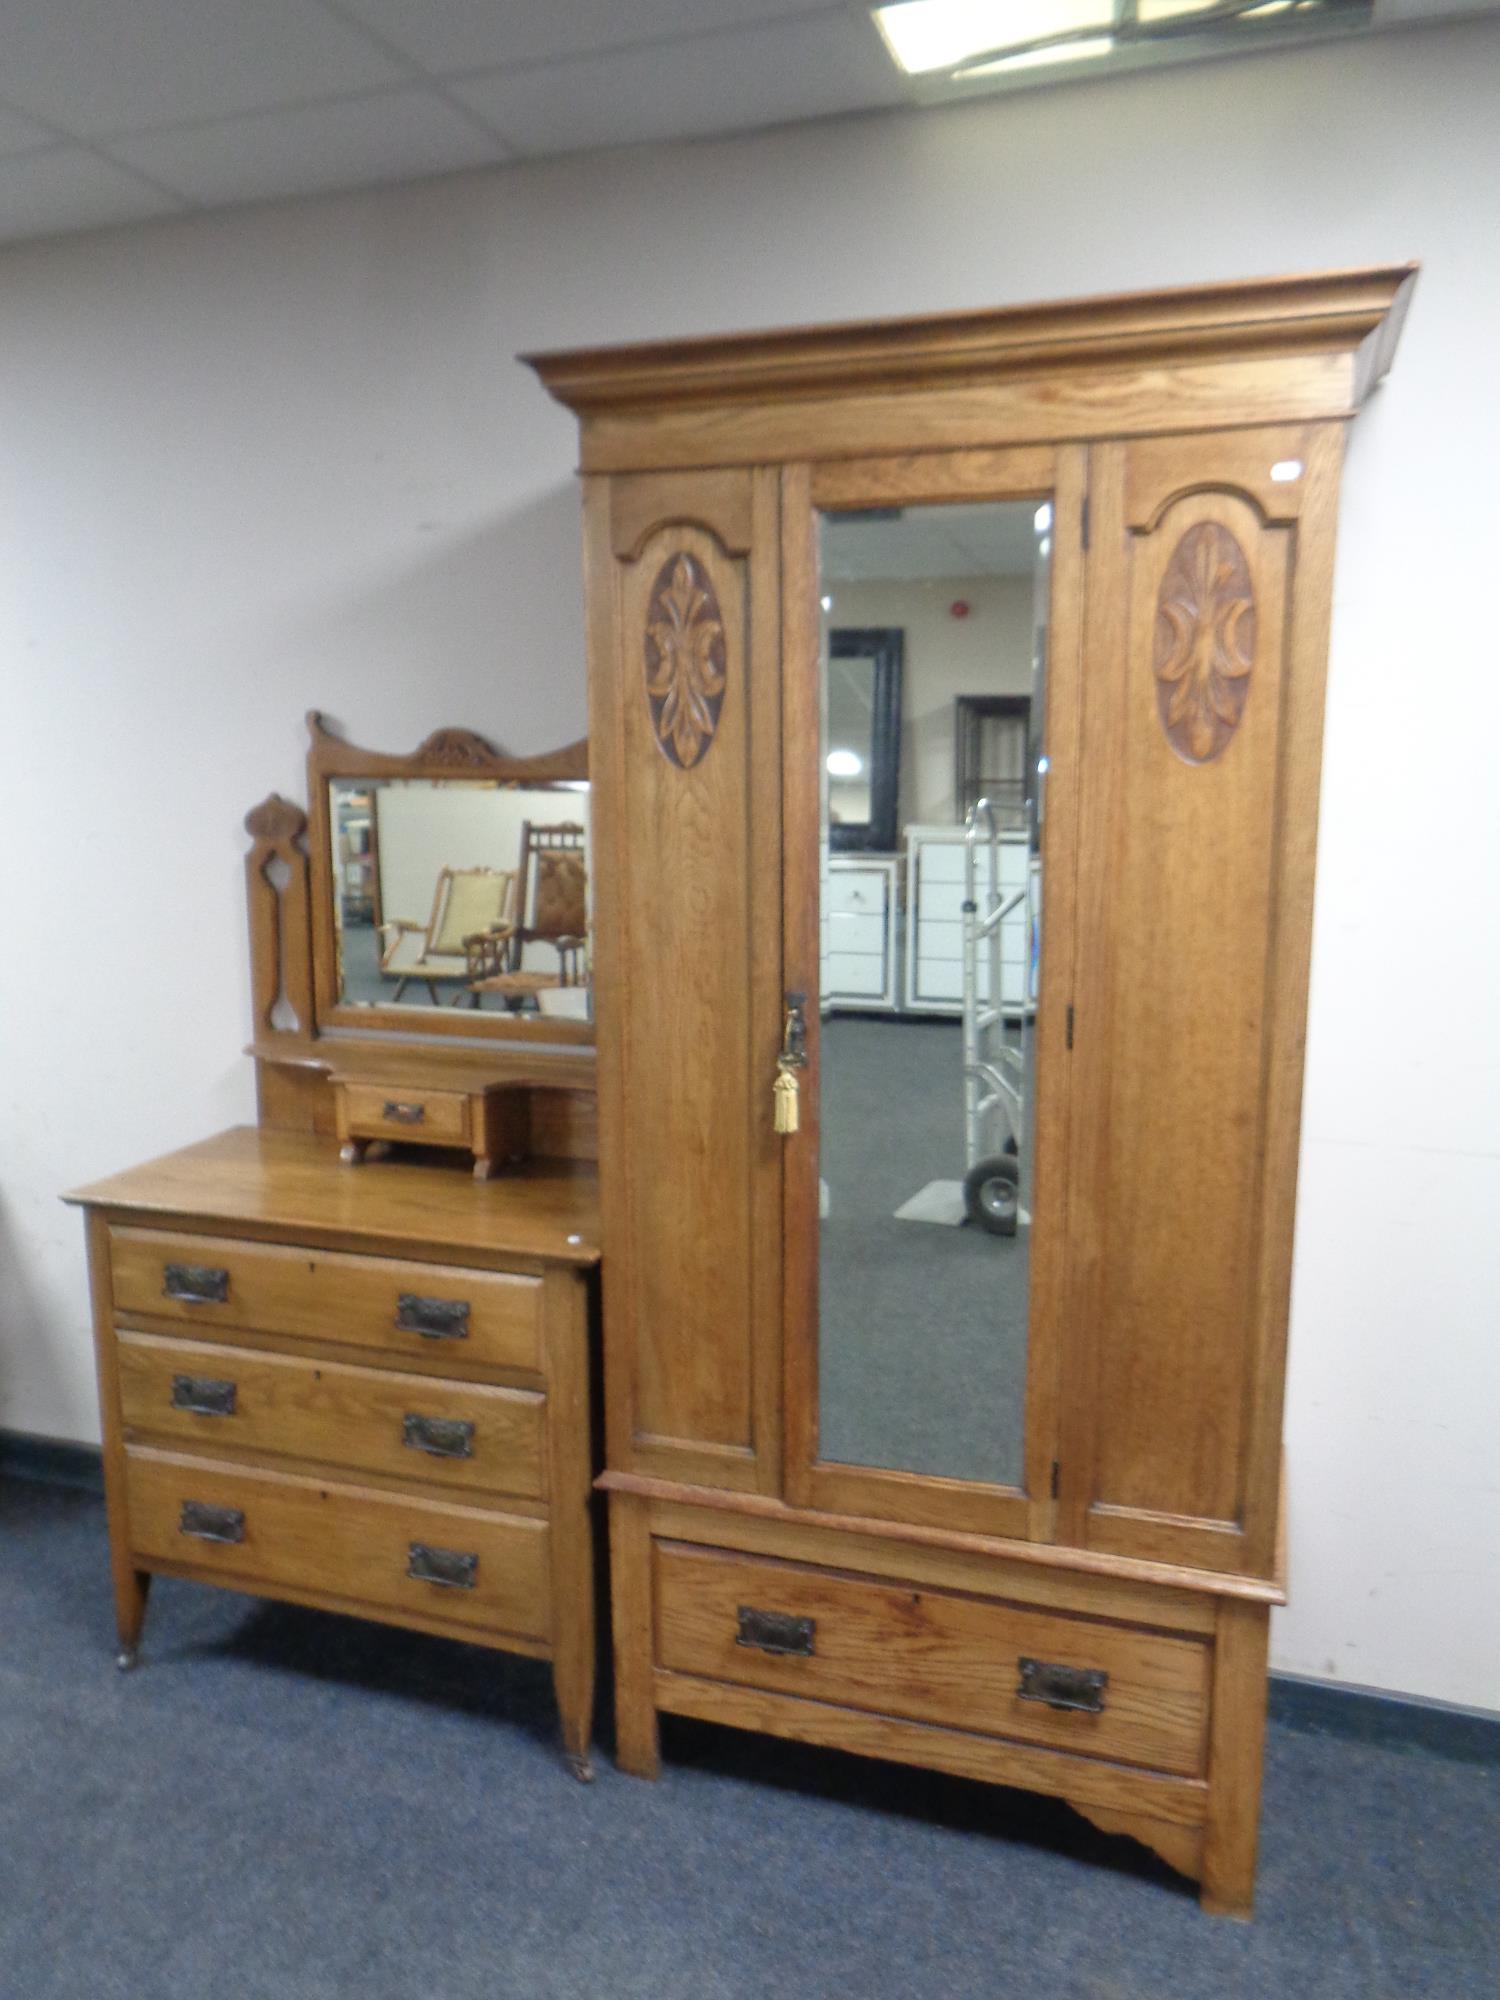 An Edwardian carved oak mirrored door wardrobe with matching mirror back dressing table fitted